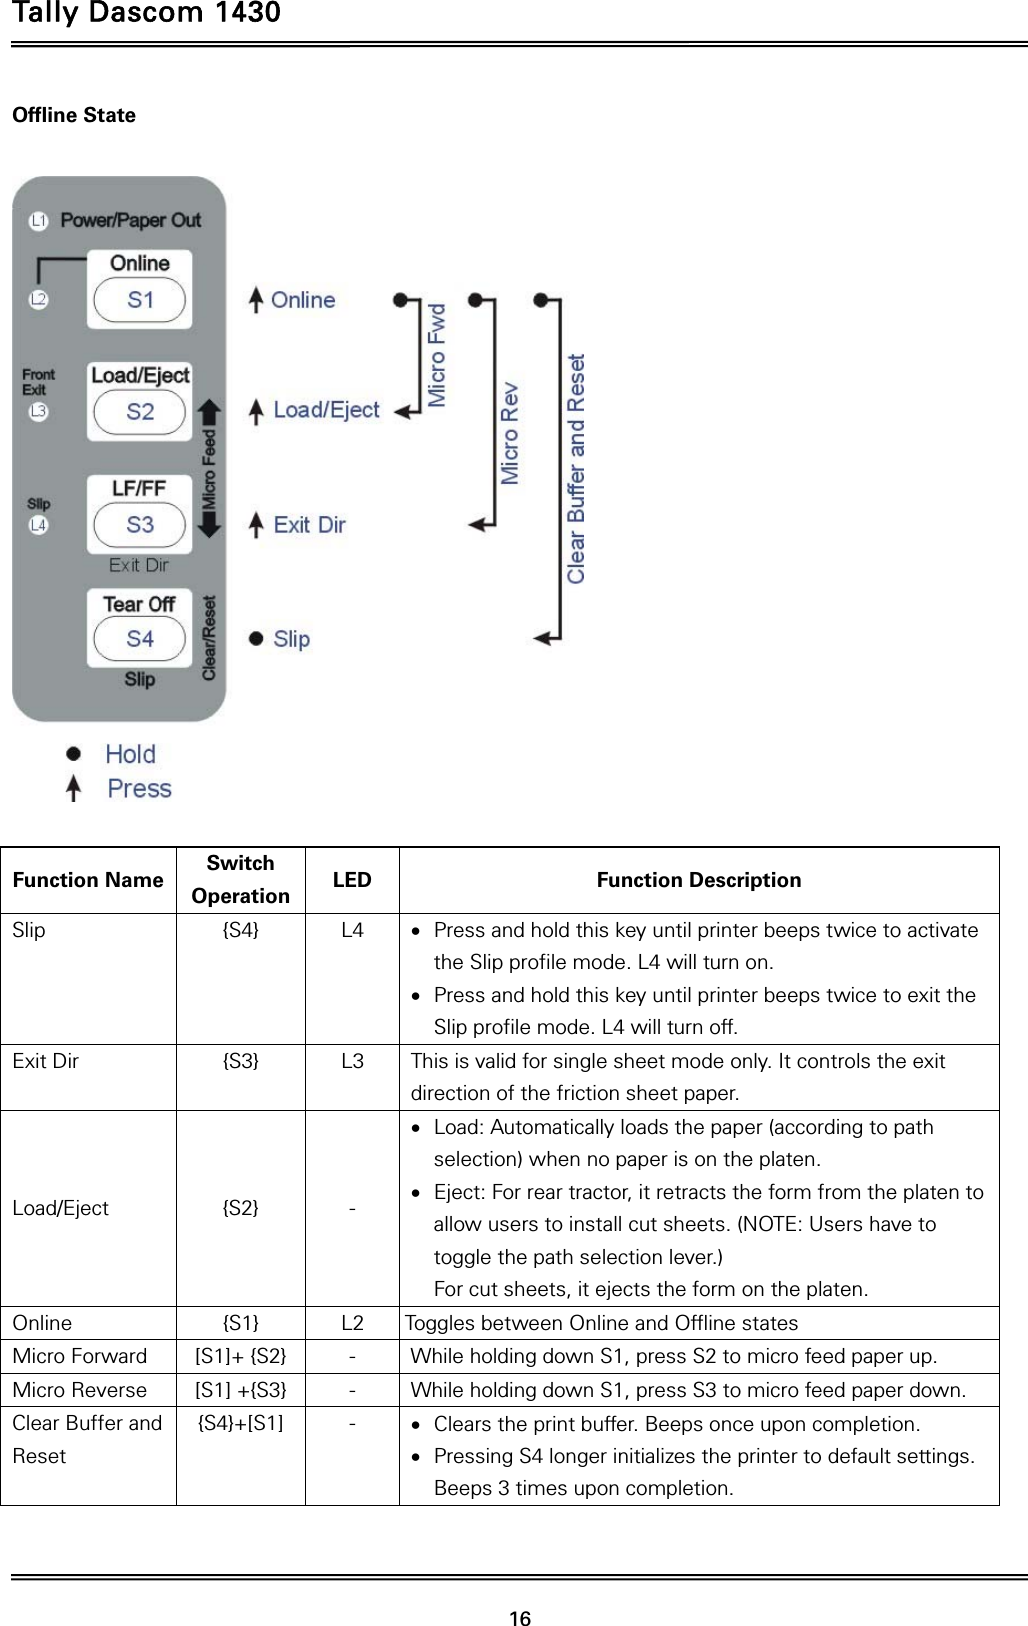 Tally Dascom 1430   16  Offline State    Function Name  Switch Operation  LED Function Description Slip   {S4}  L4   Press and hold this key until printer beeps twice to activate the Slip profile mode. L4 will turn on.  Press and hold this key until printer beeps twice to exit the Slip profile mode. L4 will turn off. Exit Dir  {S3}  L3  This is valid for single sheet mode only. It controls the exit direction of the friction sheet paper. Load/Eject {S2} -  Load: Automatically loads the paper (according to path selection) when no paper is on the platen.    Eject: For rear tractor, it retracts the form from the platen to allow users to install cut sheets. (NOTE: Users have to toggle the path selection lever.)   For cut sheets, it ejects the form on the platen. Online  {S1}  L2  Toggles between Online and Offline states Micro Forward  [S1]+ {S2}  -  While holding down S1, press S2 to micro feed paper up. Micro Reverse  [S1] +{S3}  -  While holding down S1, press S3 to micro feed paper down. Clear Buffer and Reset {S4}+[S1]   -   Clears the print buffer. Beeps once upon completion.    Pressing S4 longer initializes the printer to default settings. Beeps 3 times upon completion.  